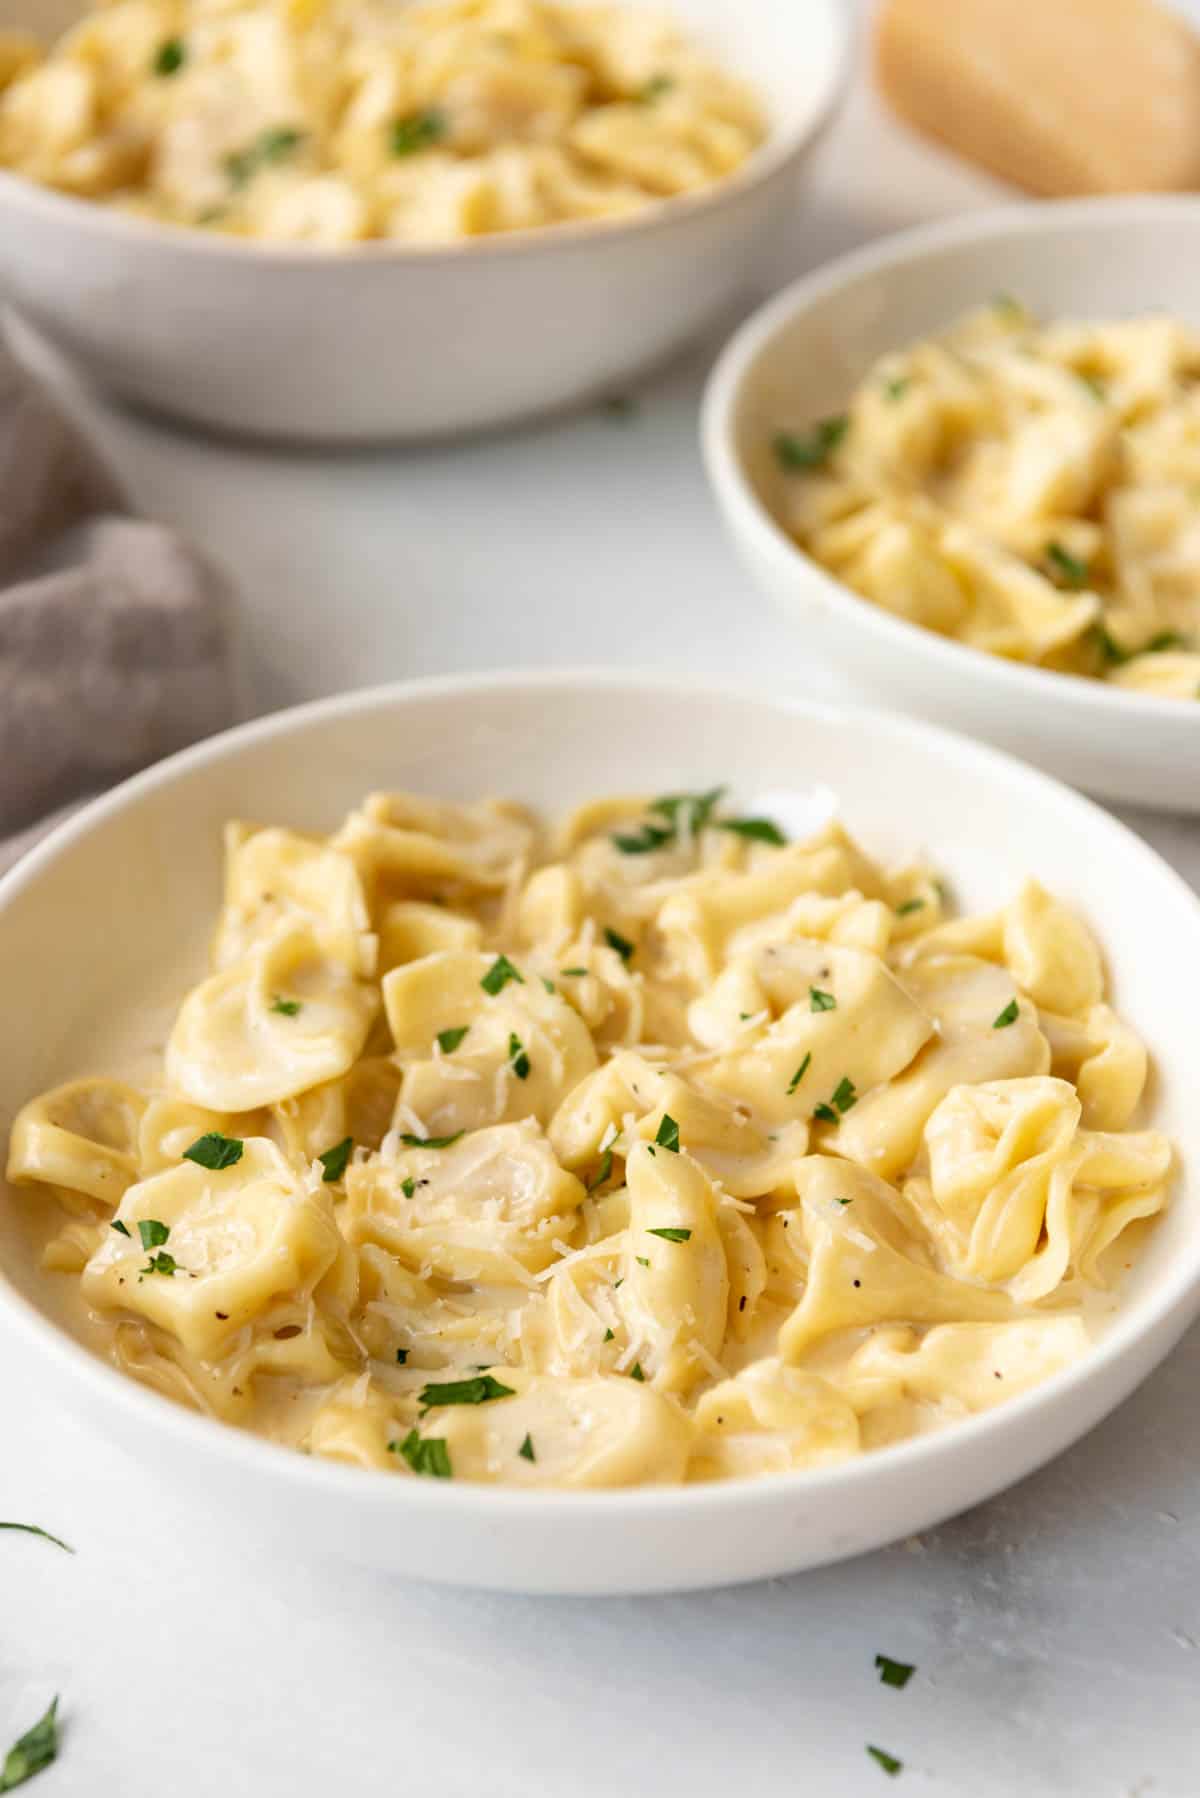 Bowls of tortellini alfredo pasta with parmesan cheese on top.